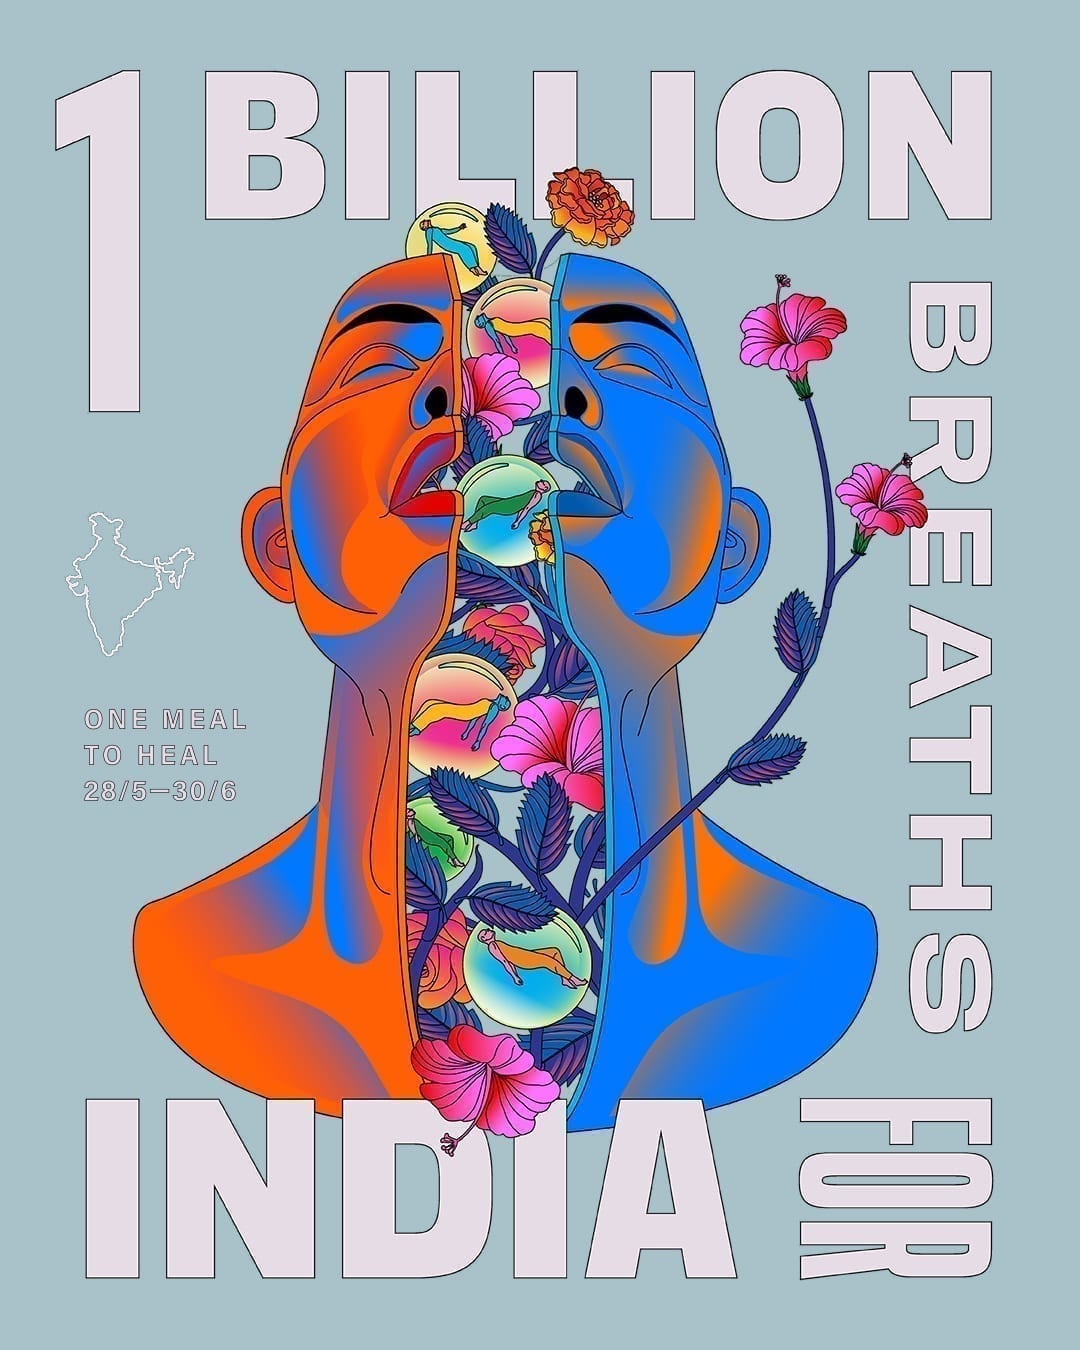 1 Billion Breaths Campaign – Global Indian Charity Campaign